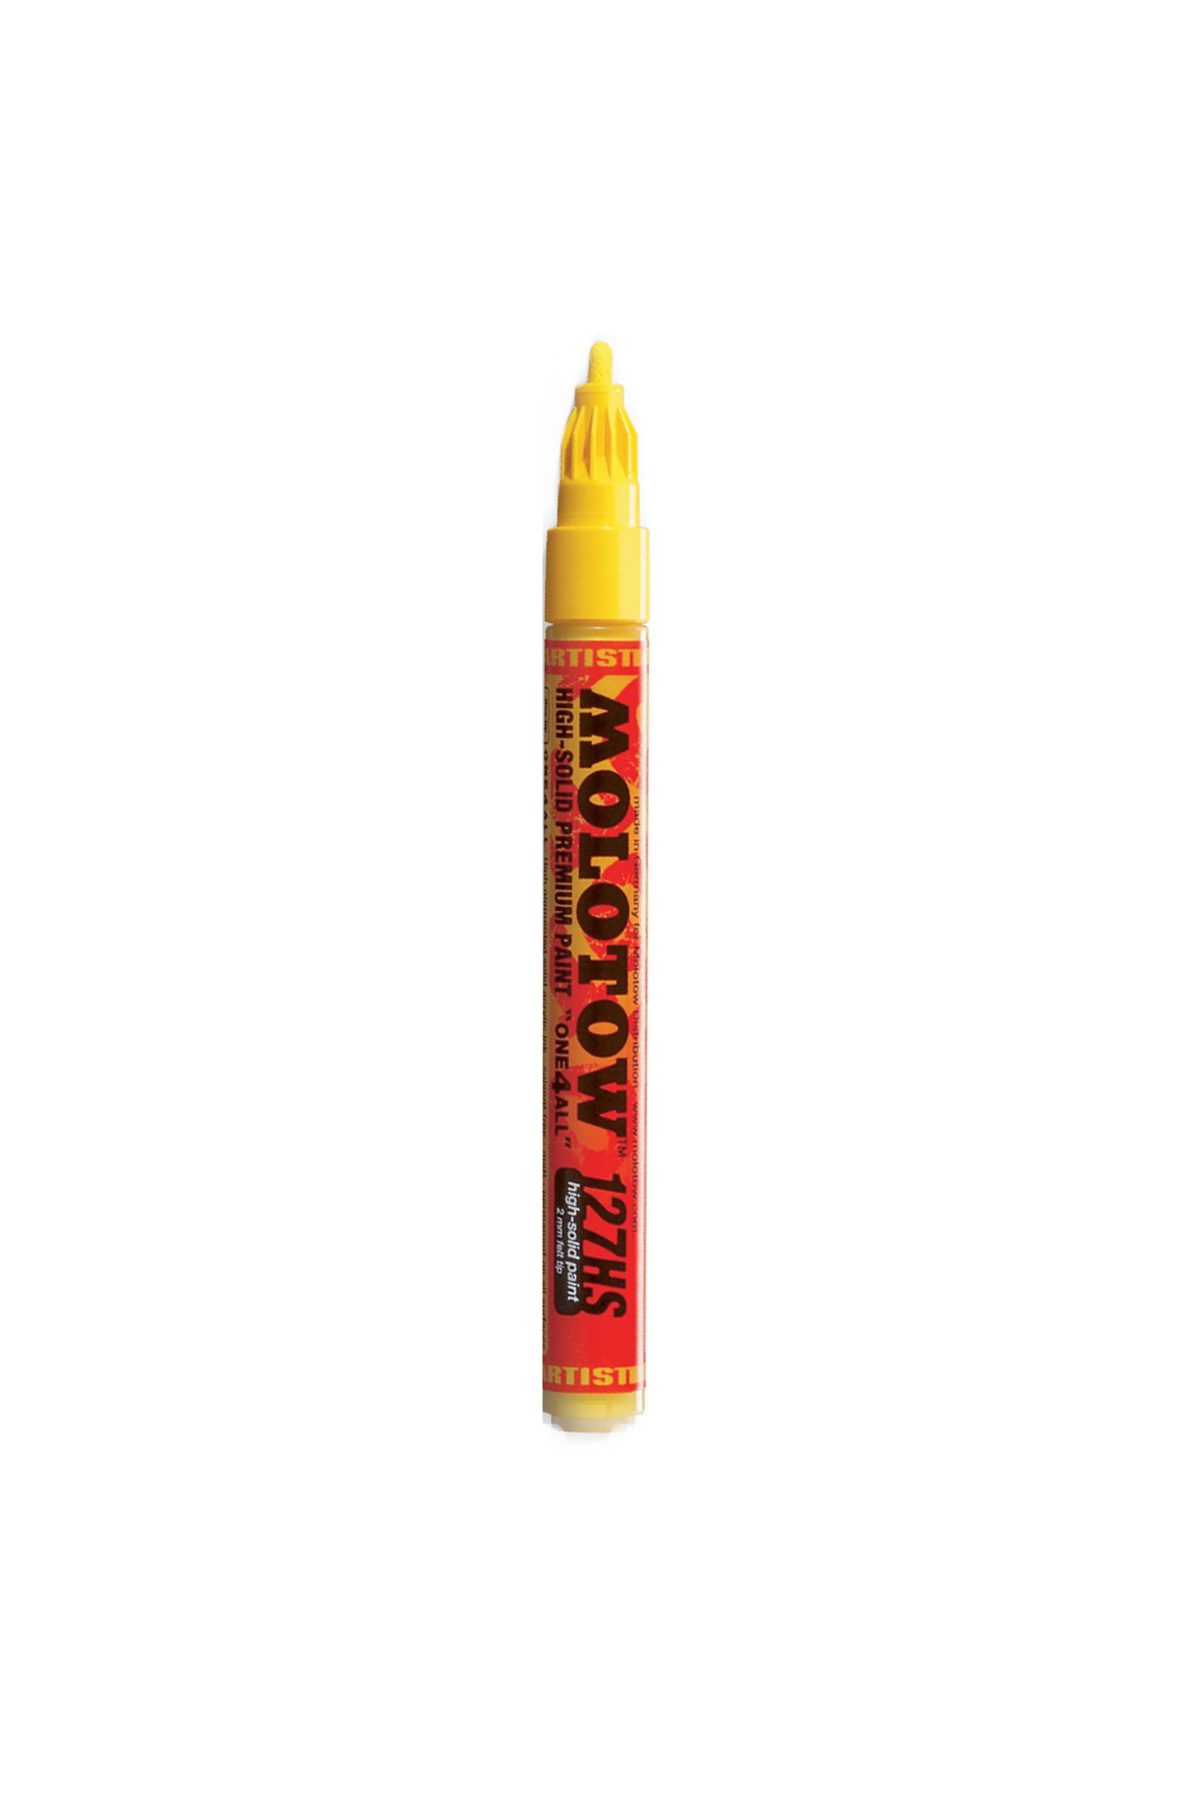 Molotow ONE4ALL-127HS Marker 2mm